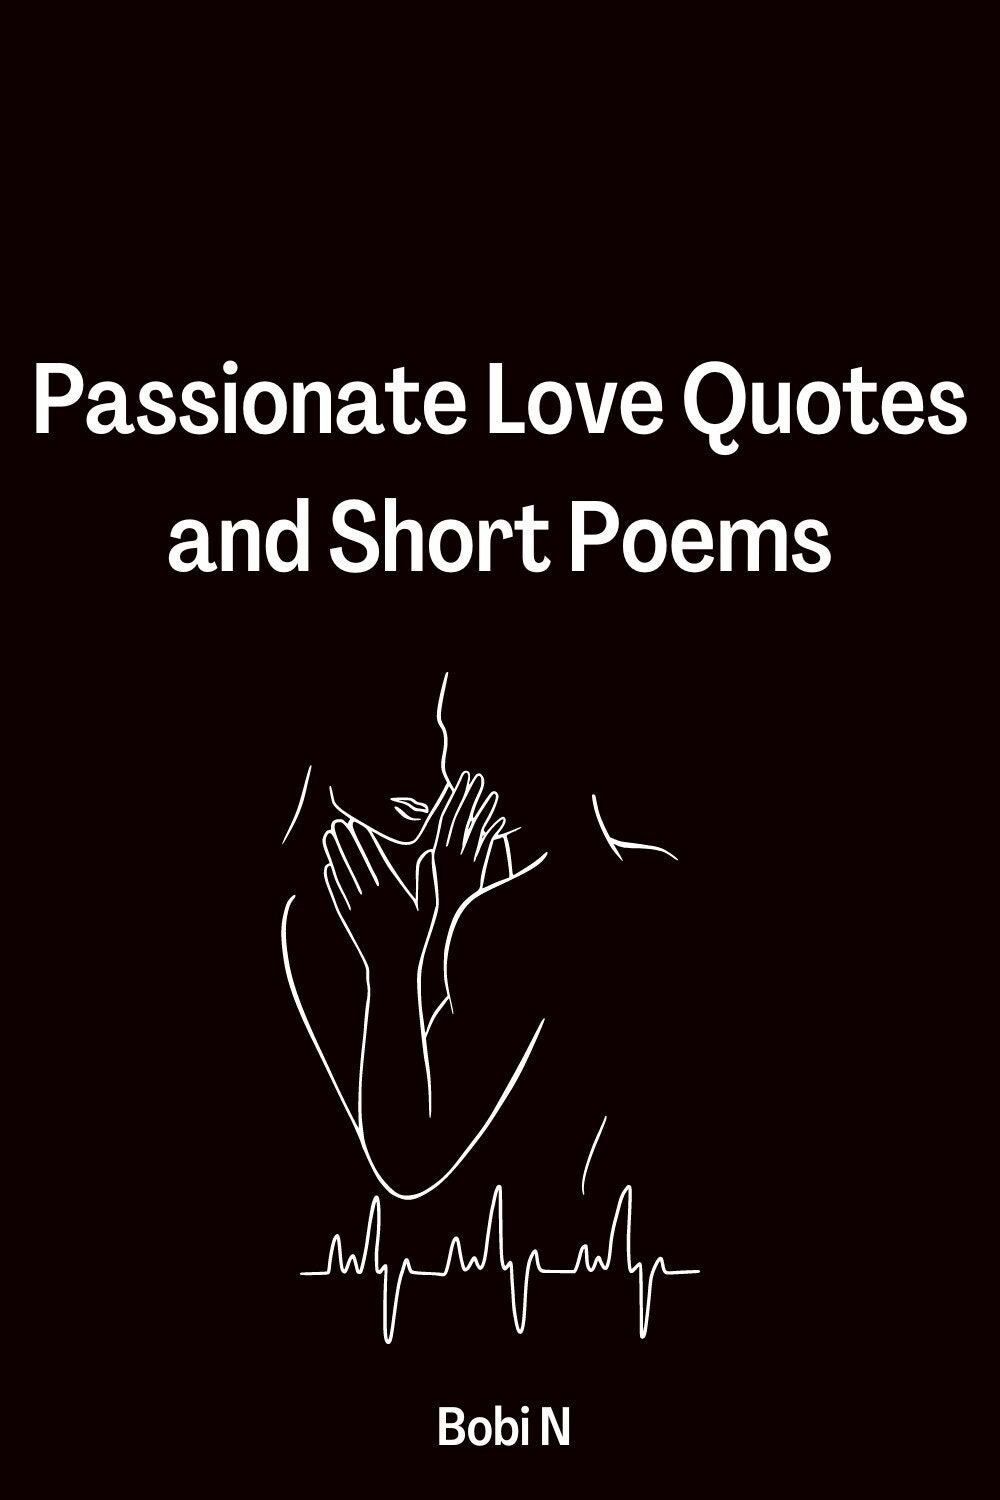 cute poems and quotes